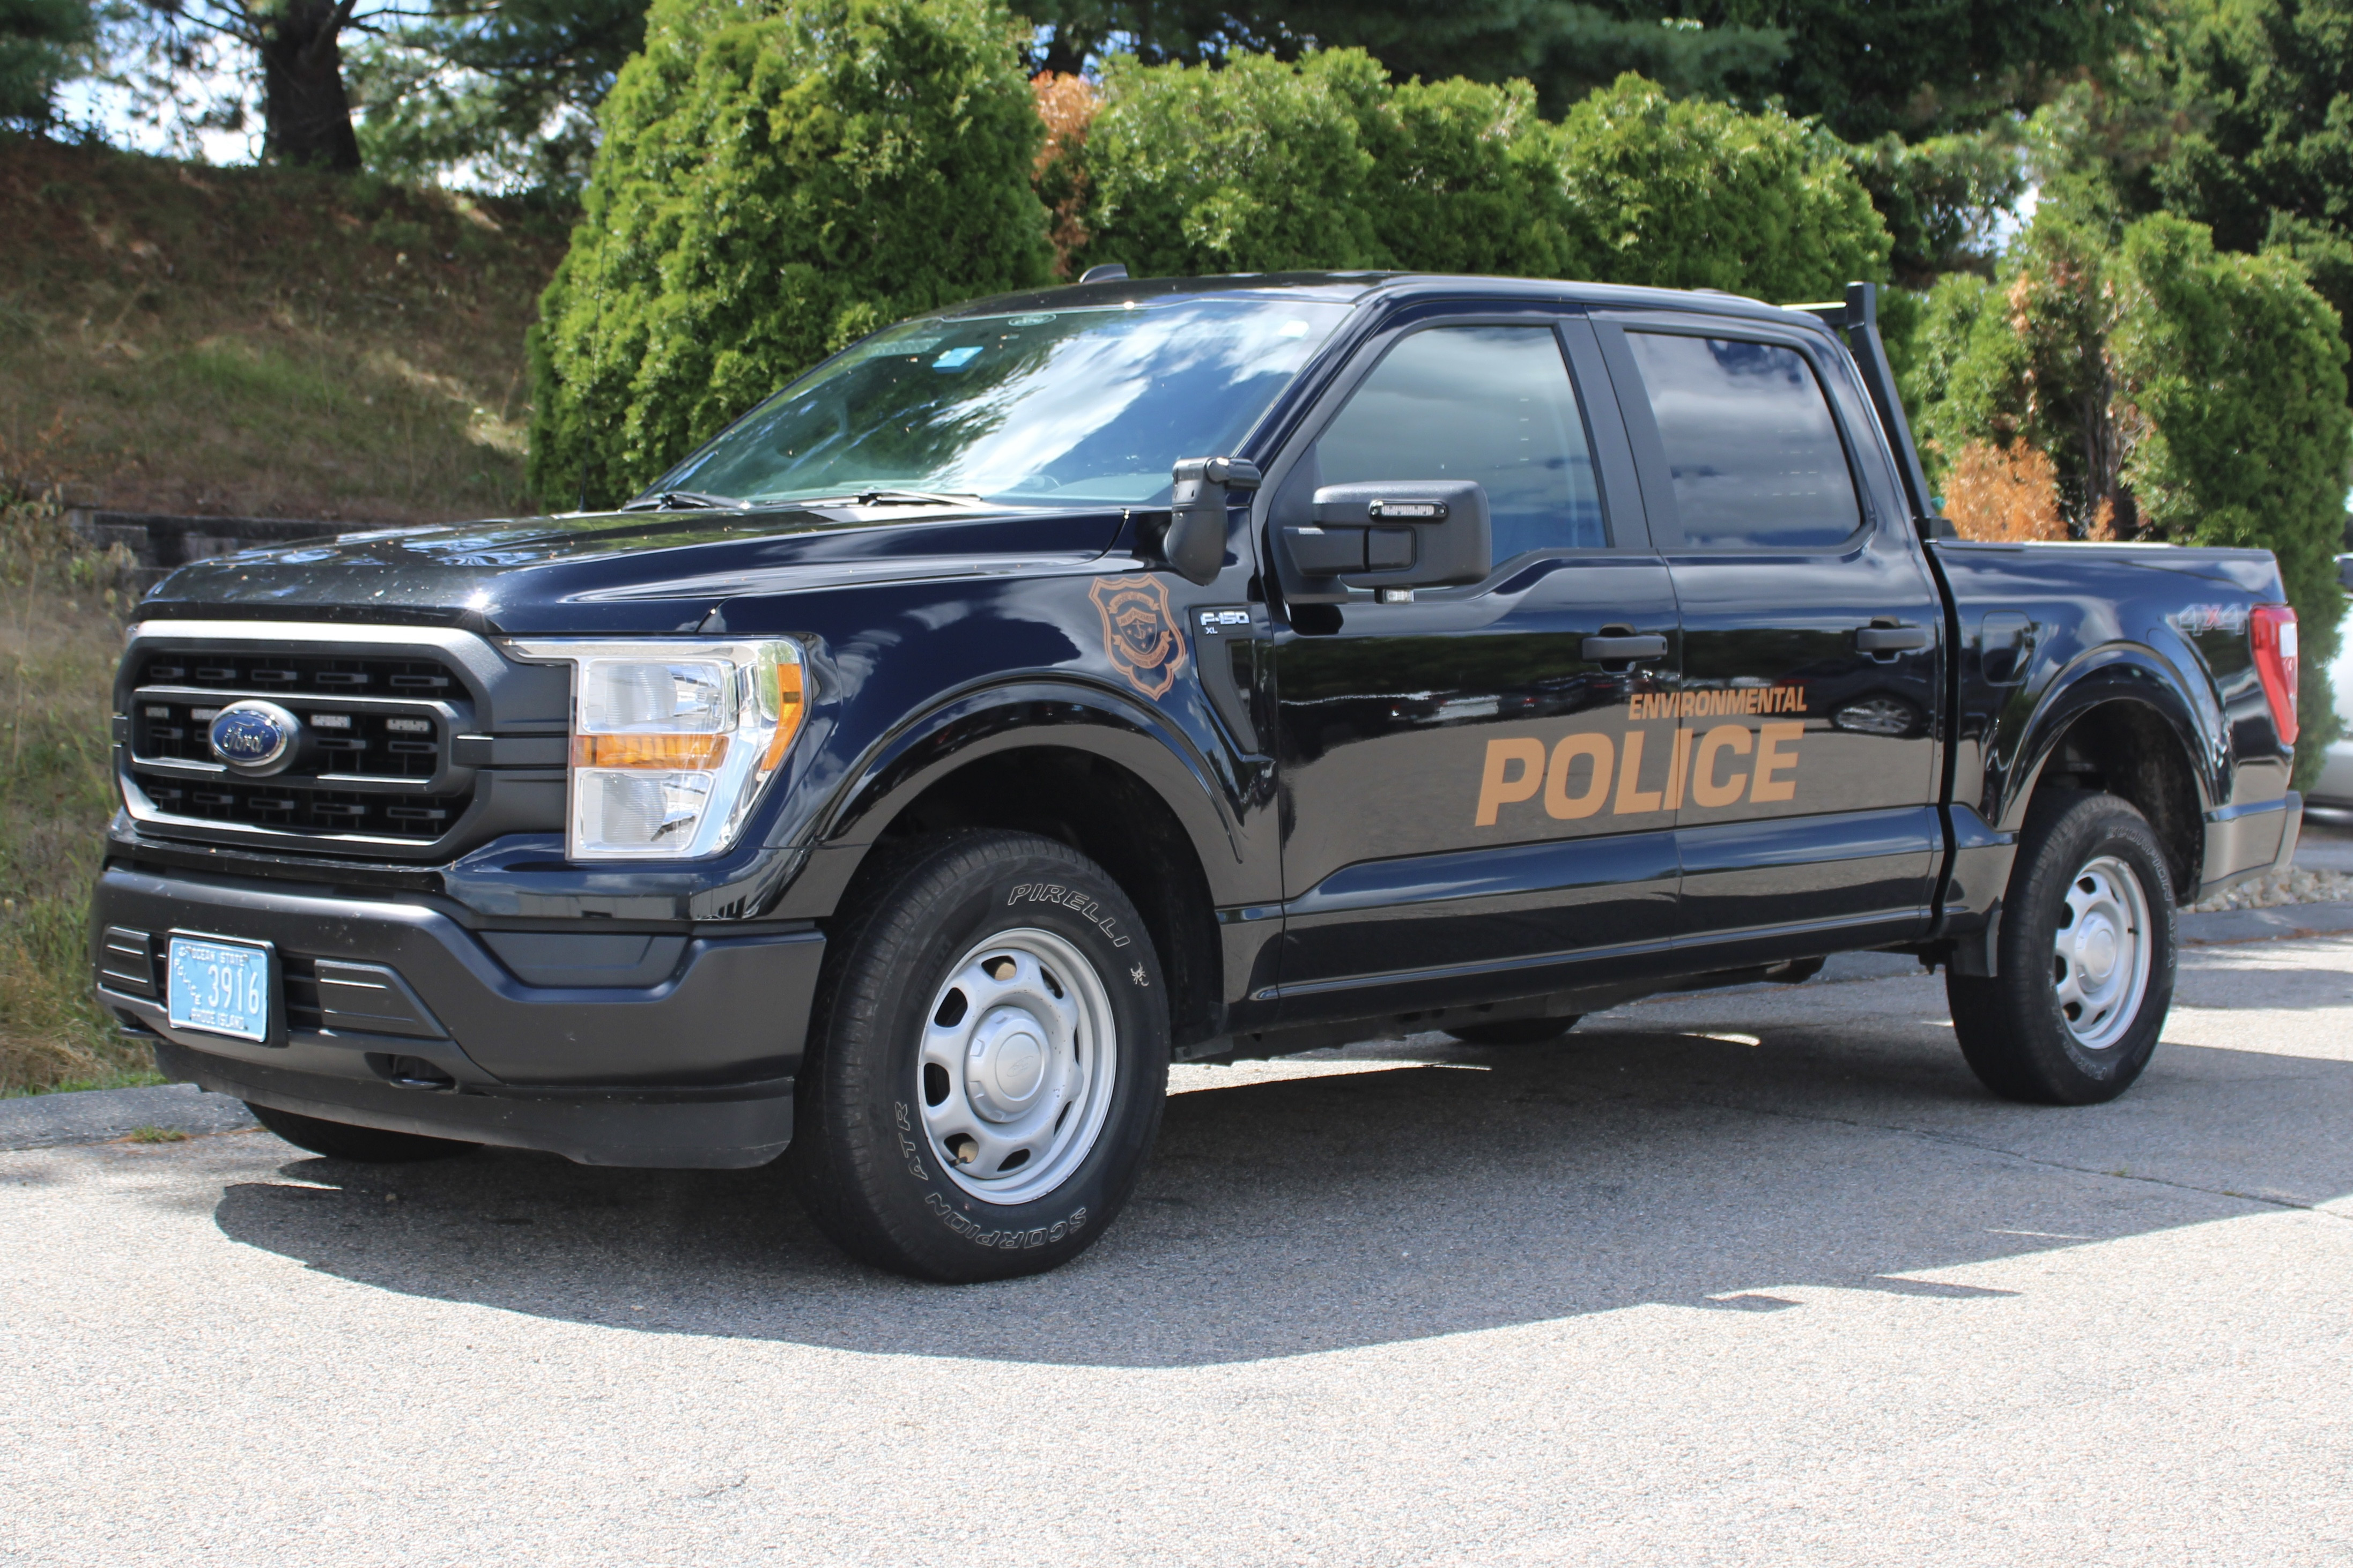 A photo  of Rhode Island Environmental Police
            Cruiser 3916, a 2021 Ford F-150 XL Crew Cab             taken by @riemergencyvehicles